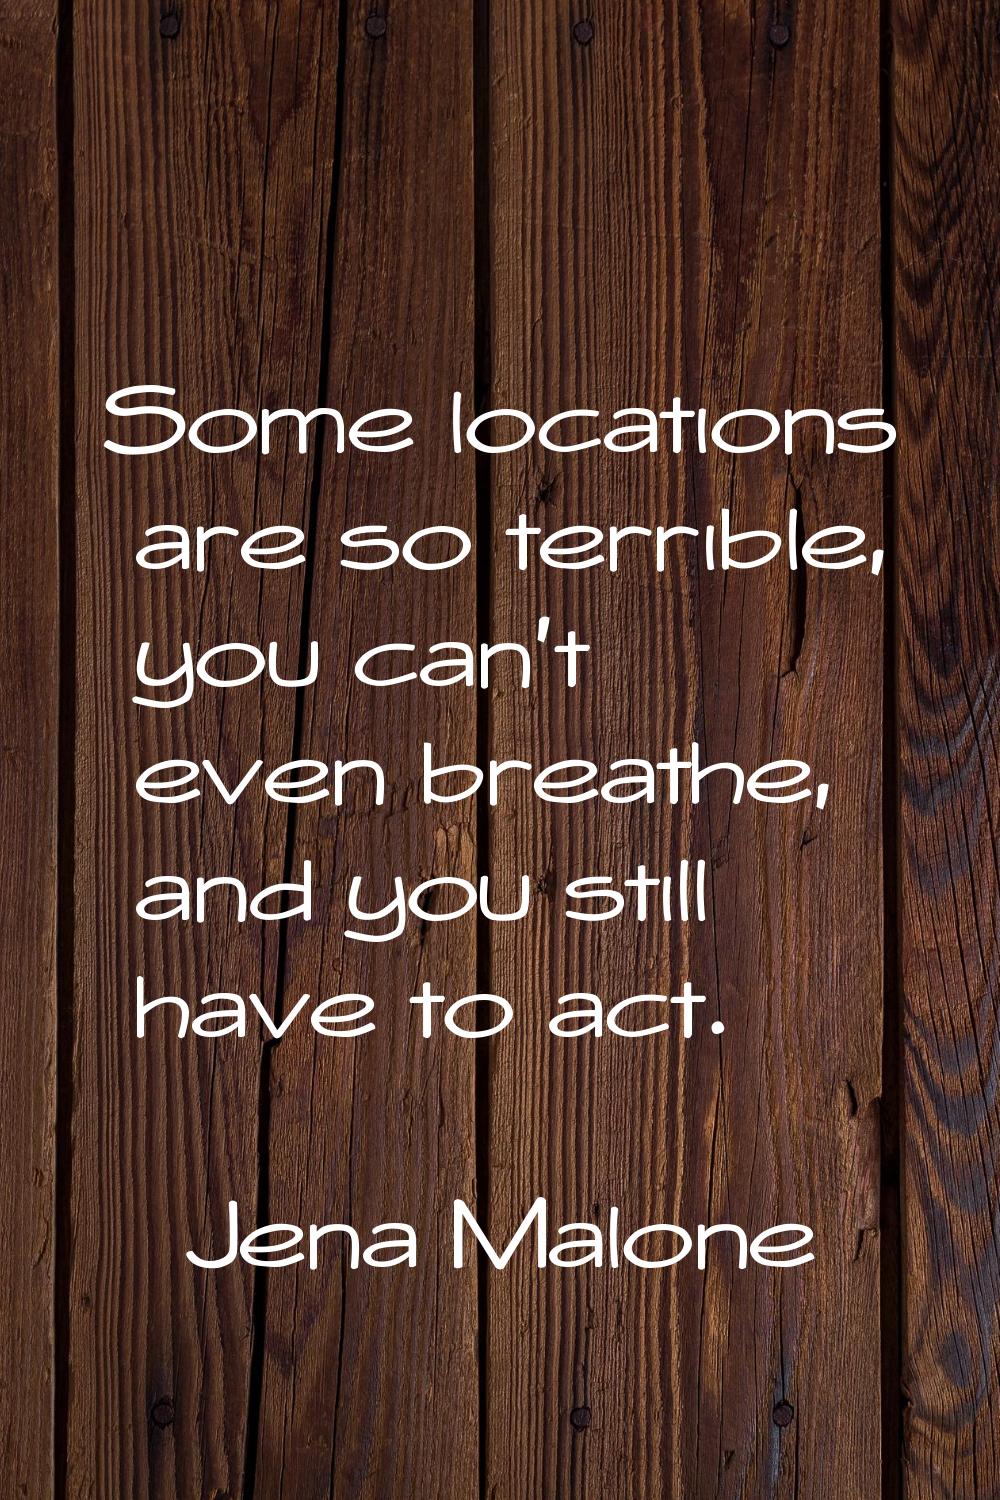 Some locations are so terrible, you can't even breathe, and you still have to act.